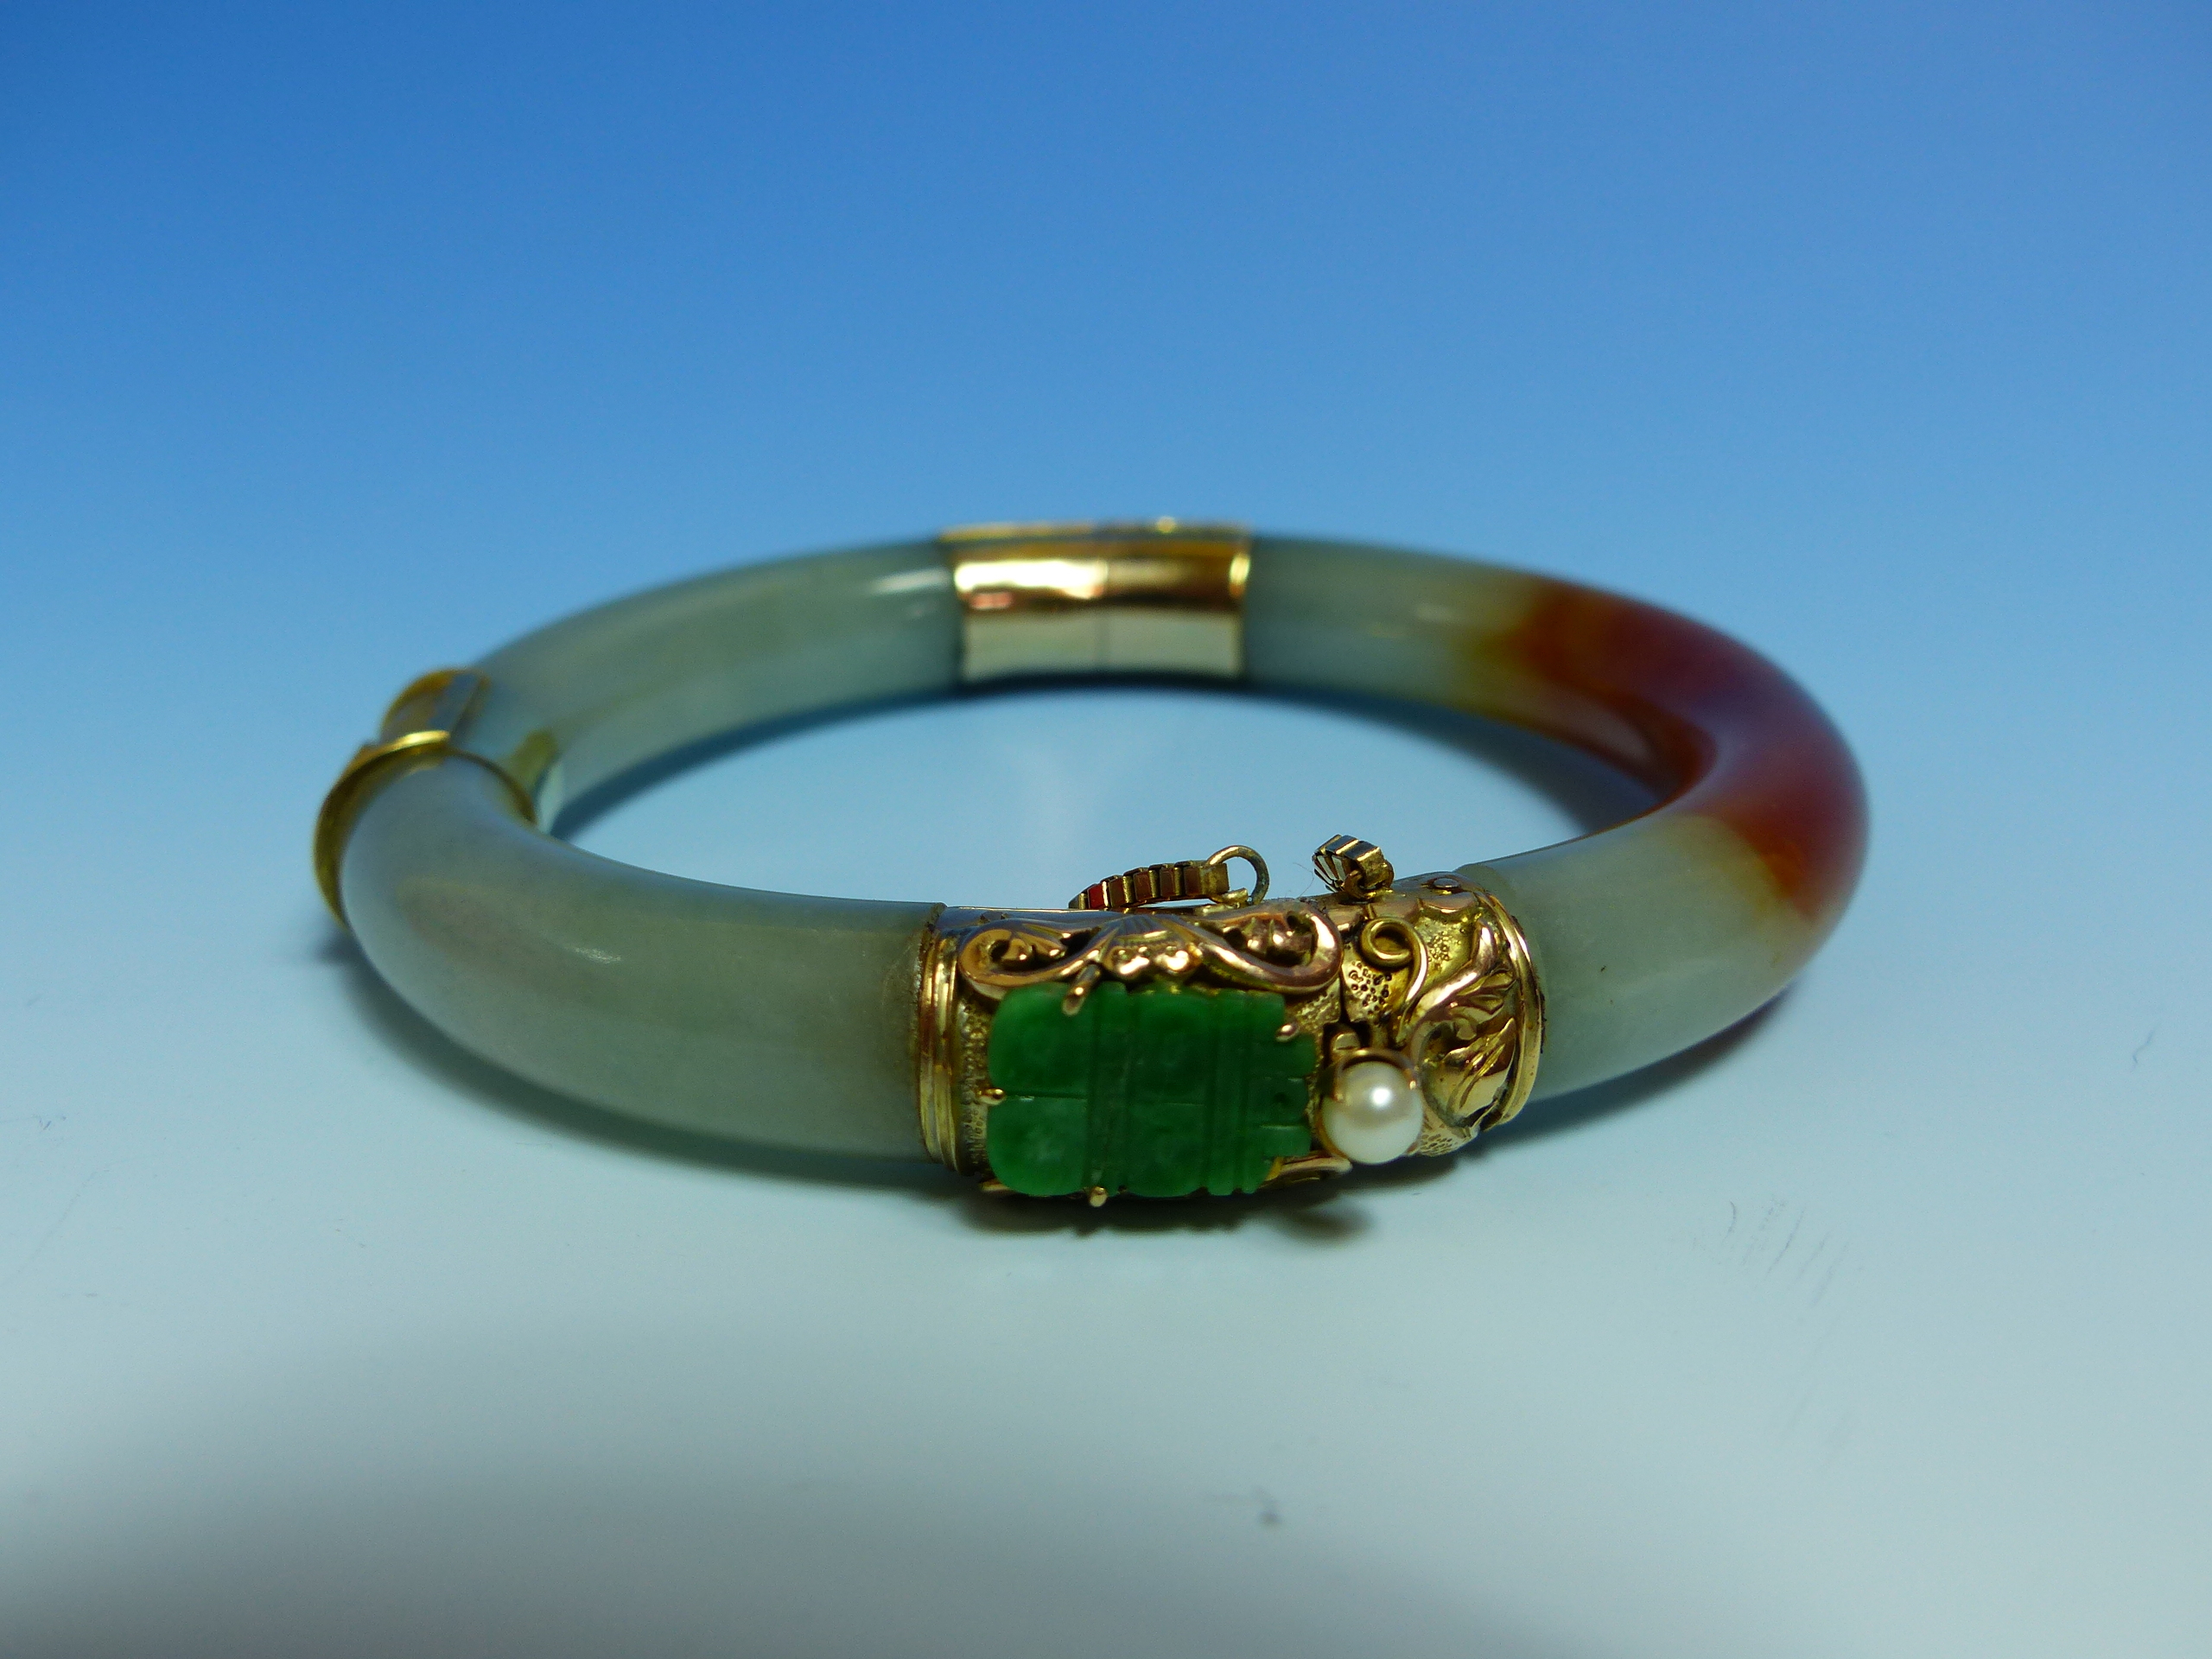 A 14K STAMPED GOLD MOUNTED JADE BANGLE FINISHED WITH A CARVED FISH, JADE AND PEARL CLASP COMPLETE - Image 24 of 38